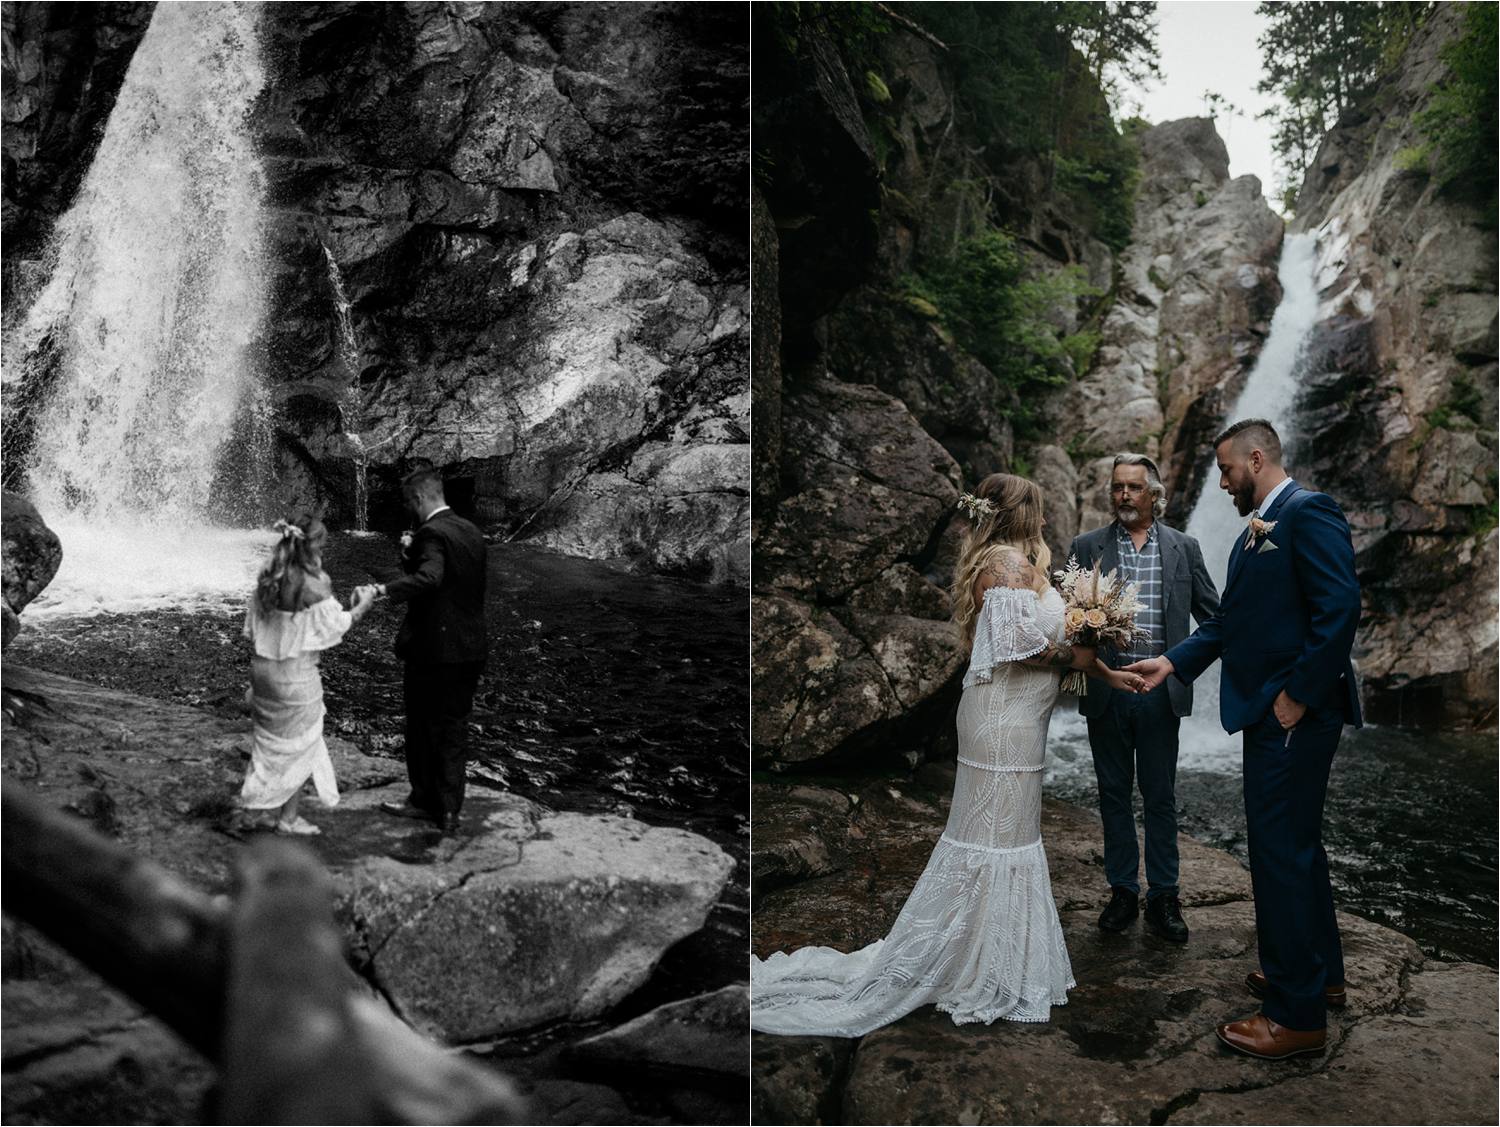 Boho bride and her groom share vows in front of waterfall